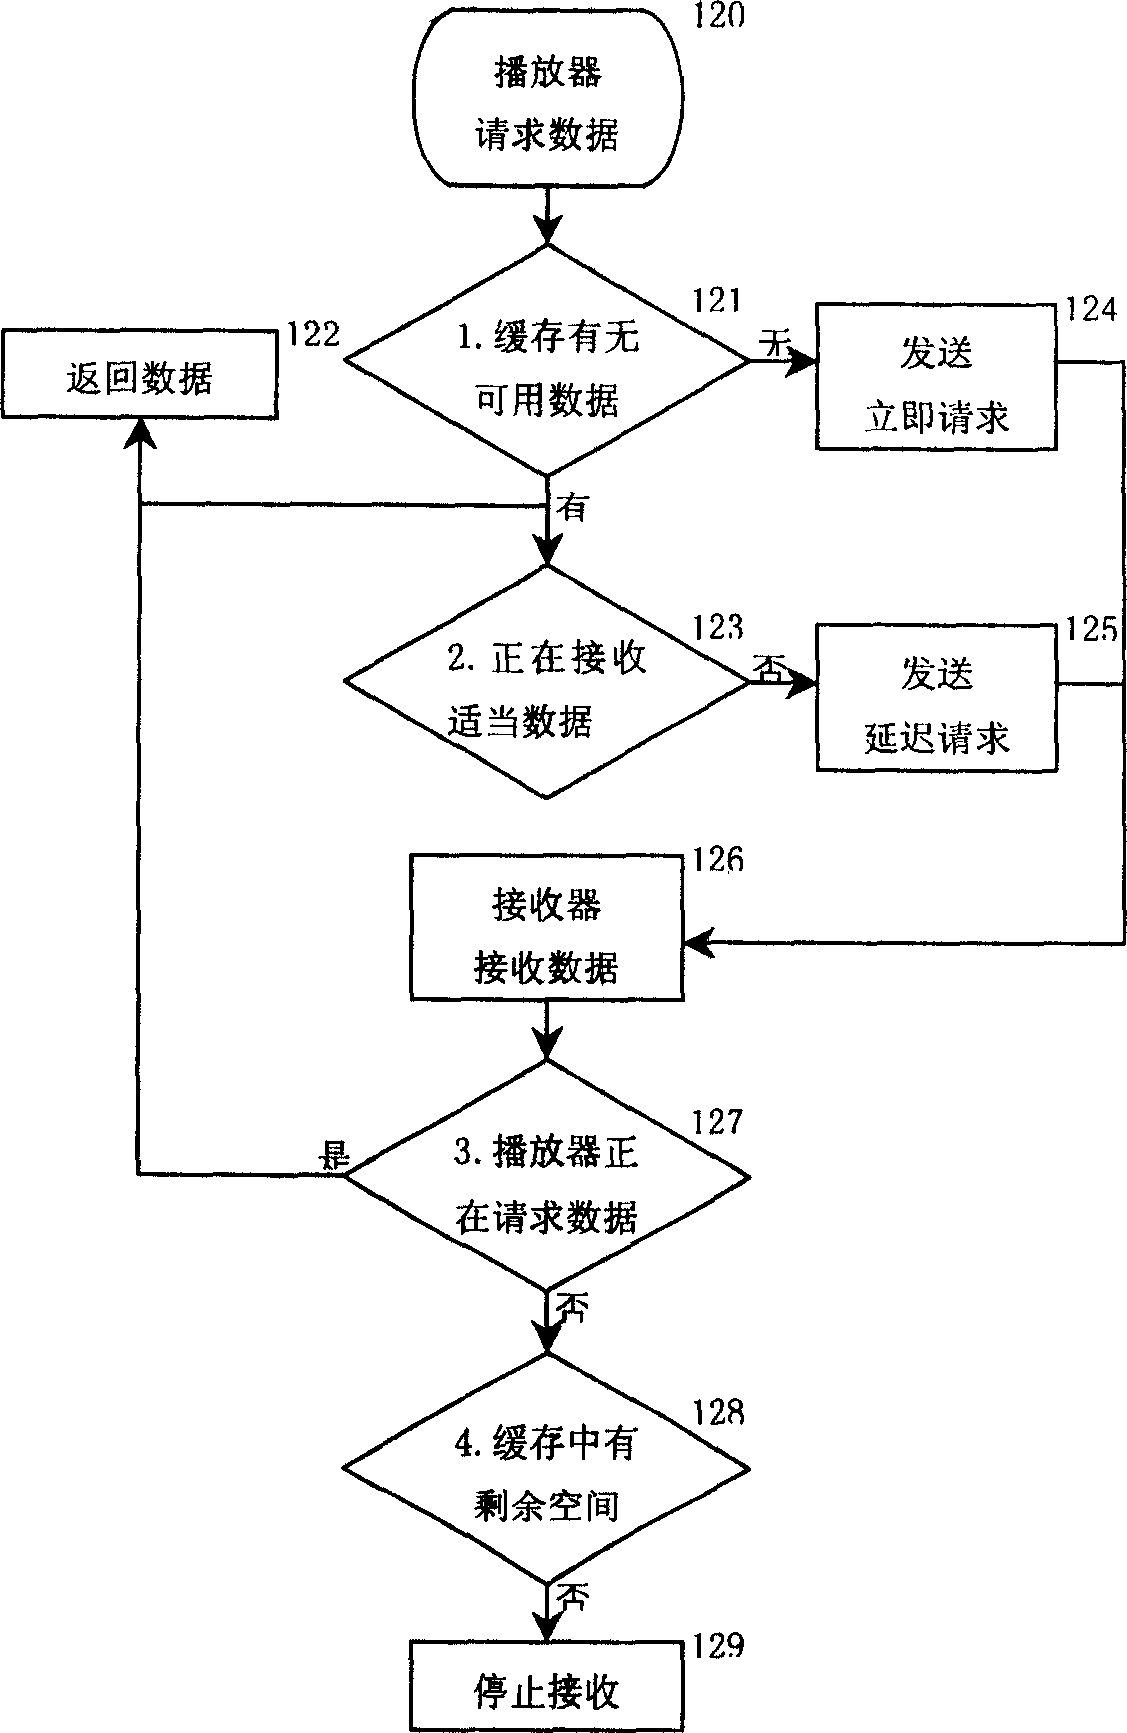 Multi-broadcasting stream merging method of supporting VCR function